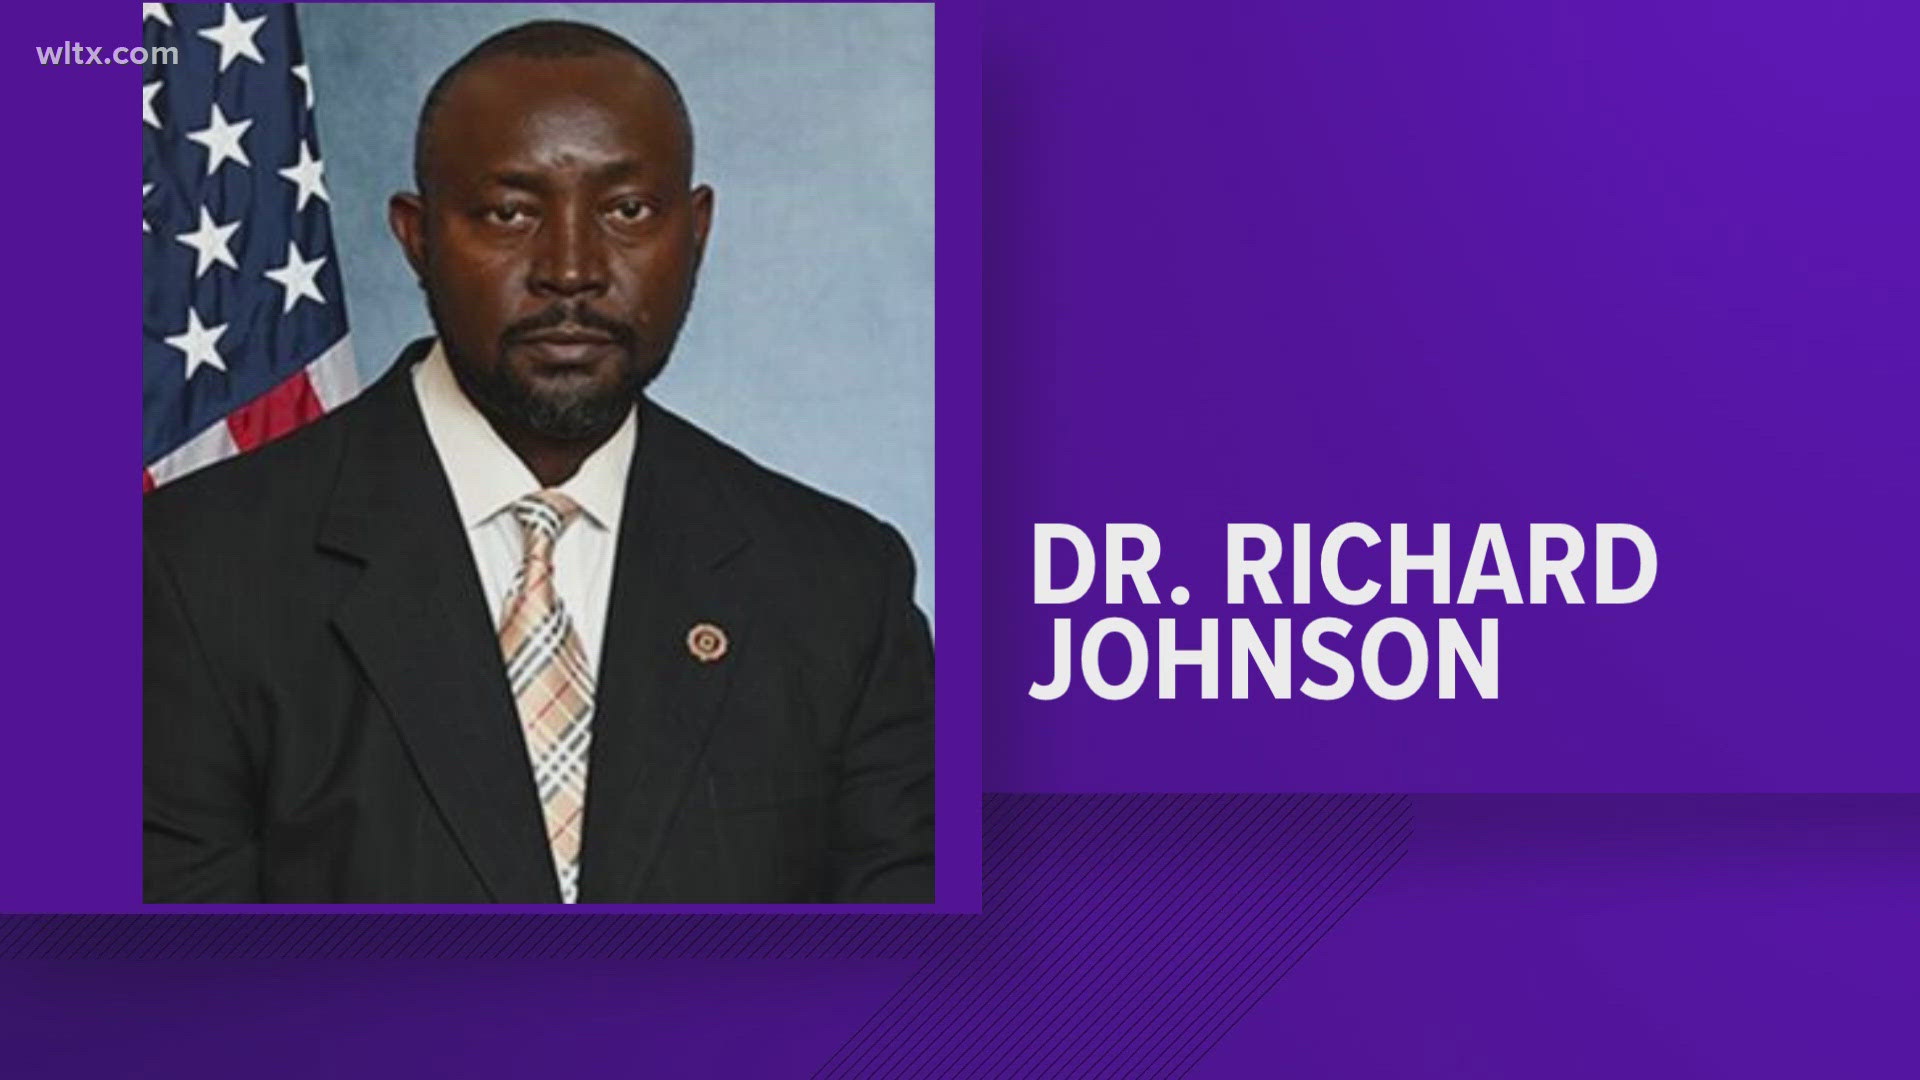 The university announced the appointment of SLEC senior special agent  Dr. Richard Johnson.